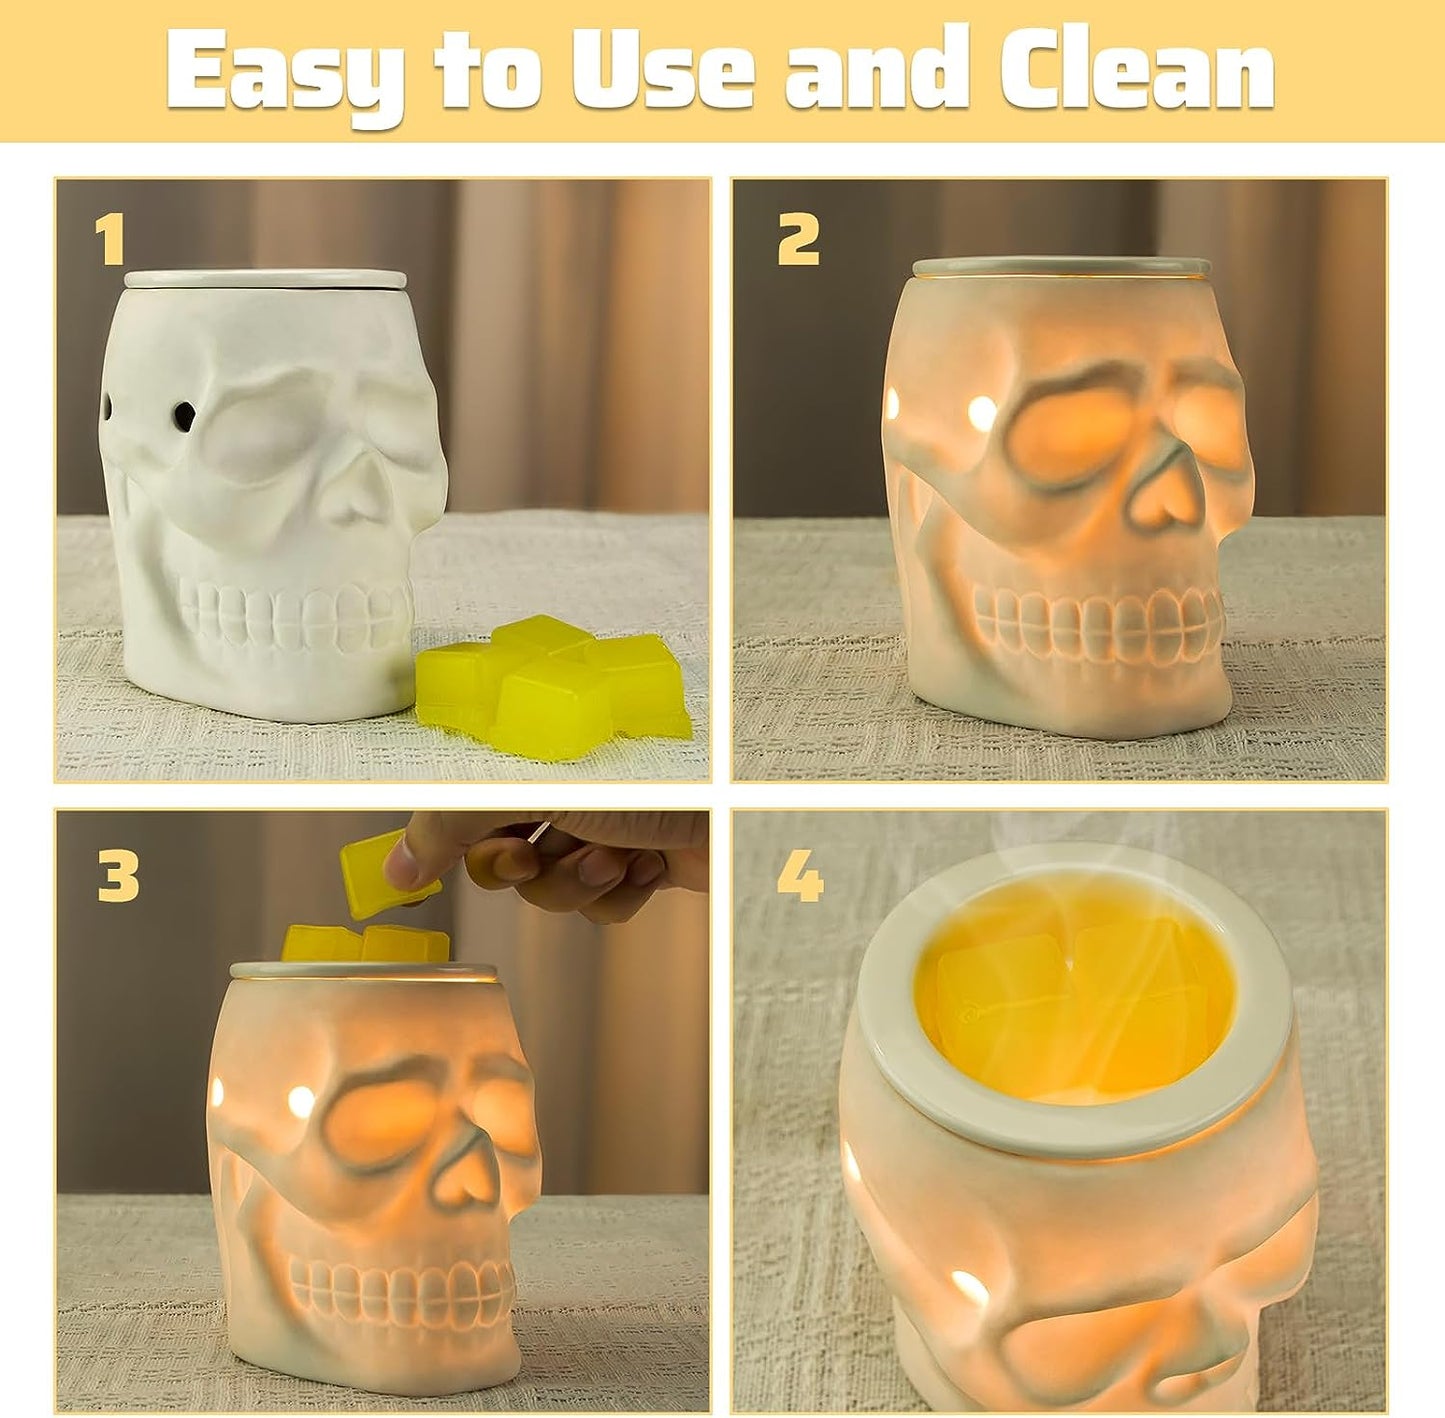 Resurgent Skull Ceramic Electric Wax Melt Warmer - Home Fragrance Oil Diffuser for Home Decor, Office, and Living Room, Ideal Gifts, Includes Two Bulbs